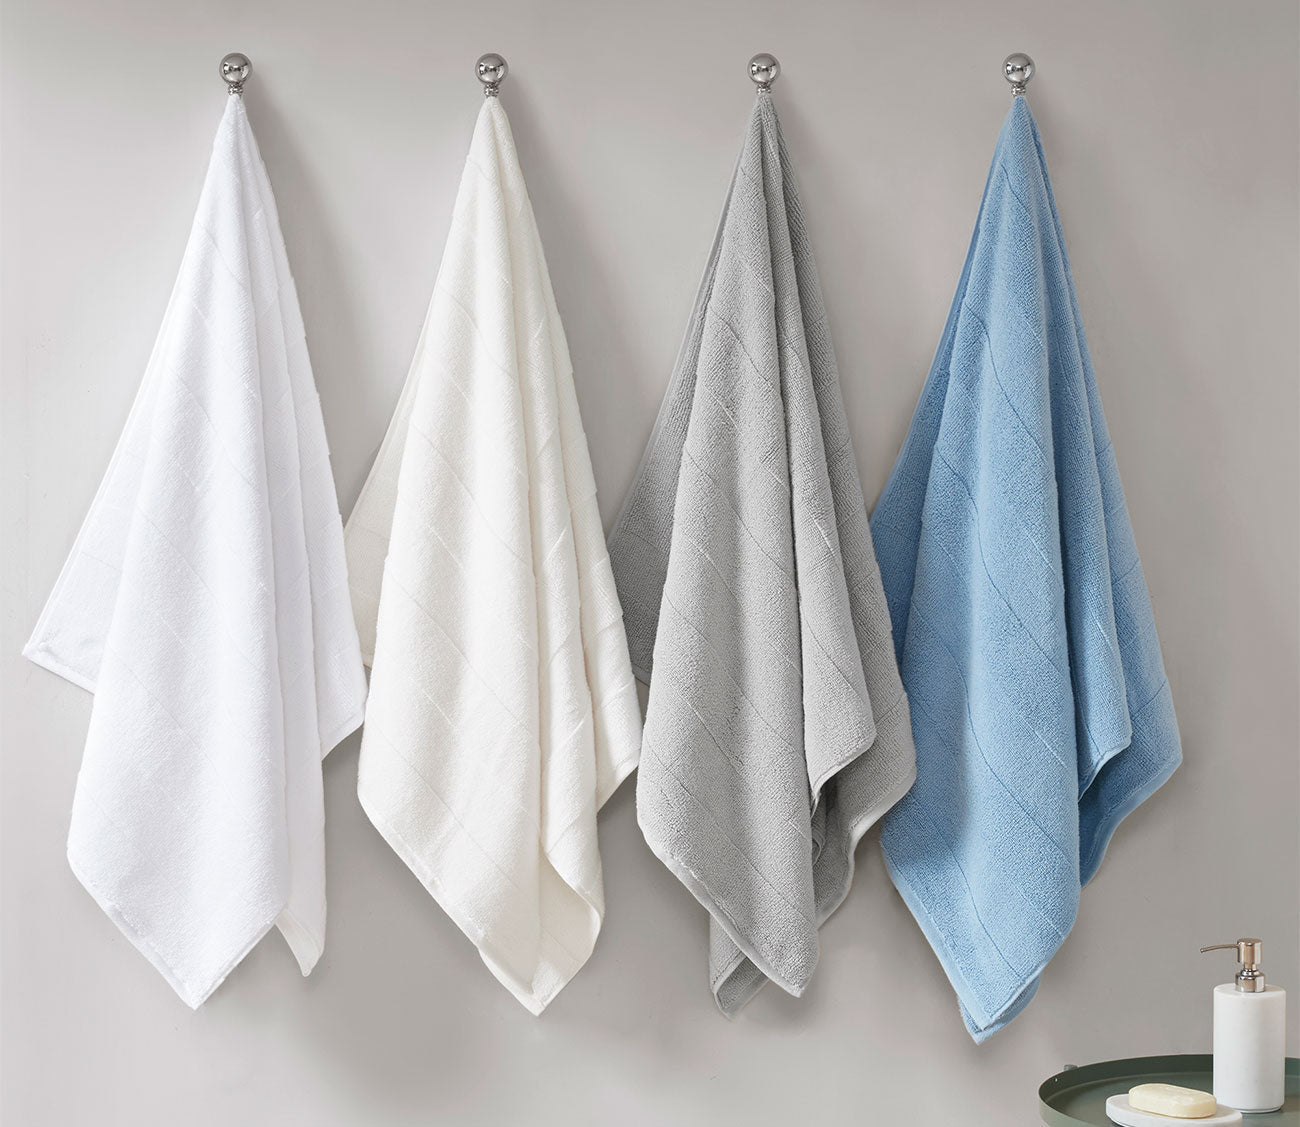 6pc Nurture Sustainable Antimicrobial Towel Set White - Clean Spaces